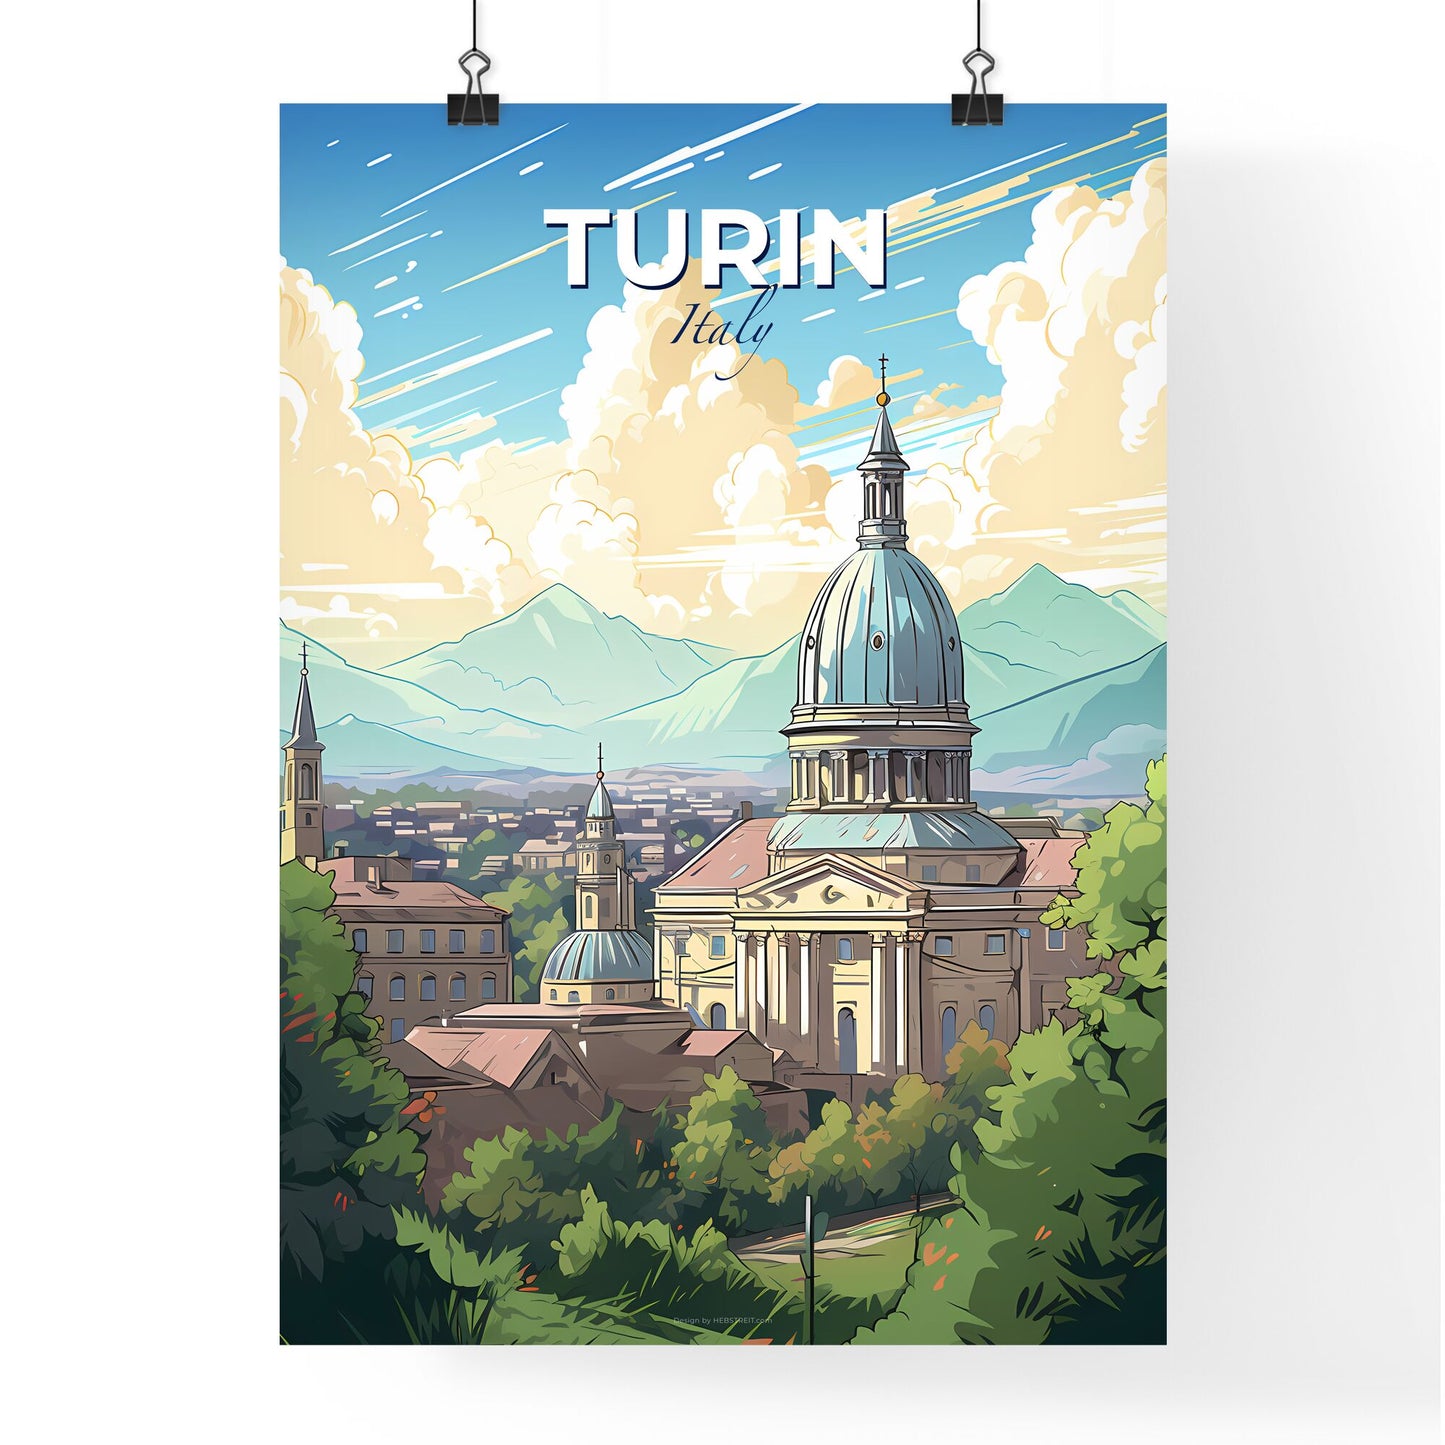 Turin Italy Skyline - A Building With A Dome And Trees - Customizable Travel Gift Default Title